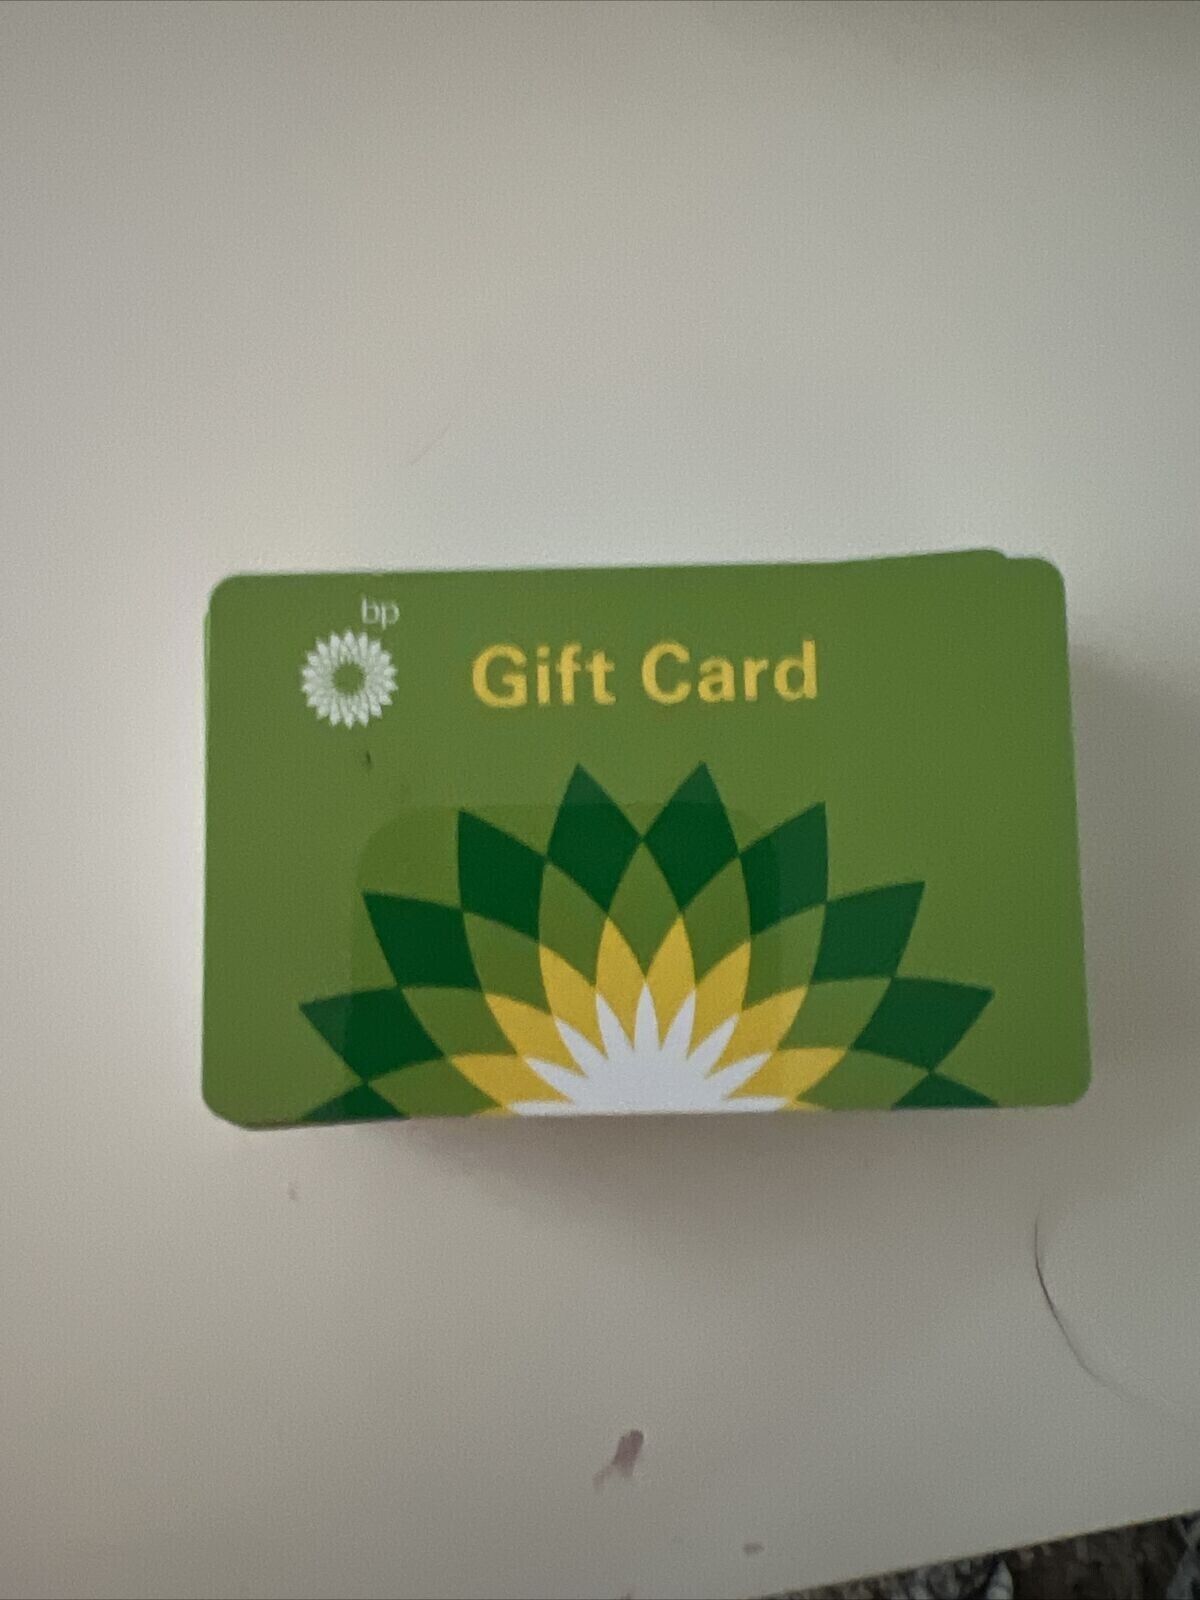 BP Gas Gasoline Gift Card Collectible No Value Green Unscratched